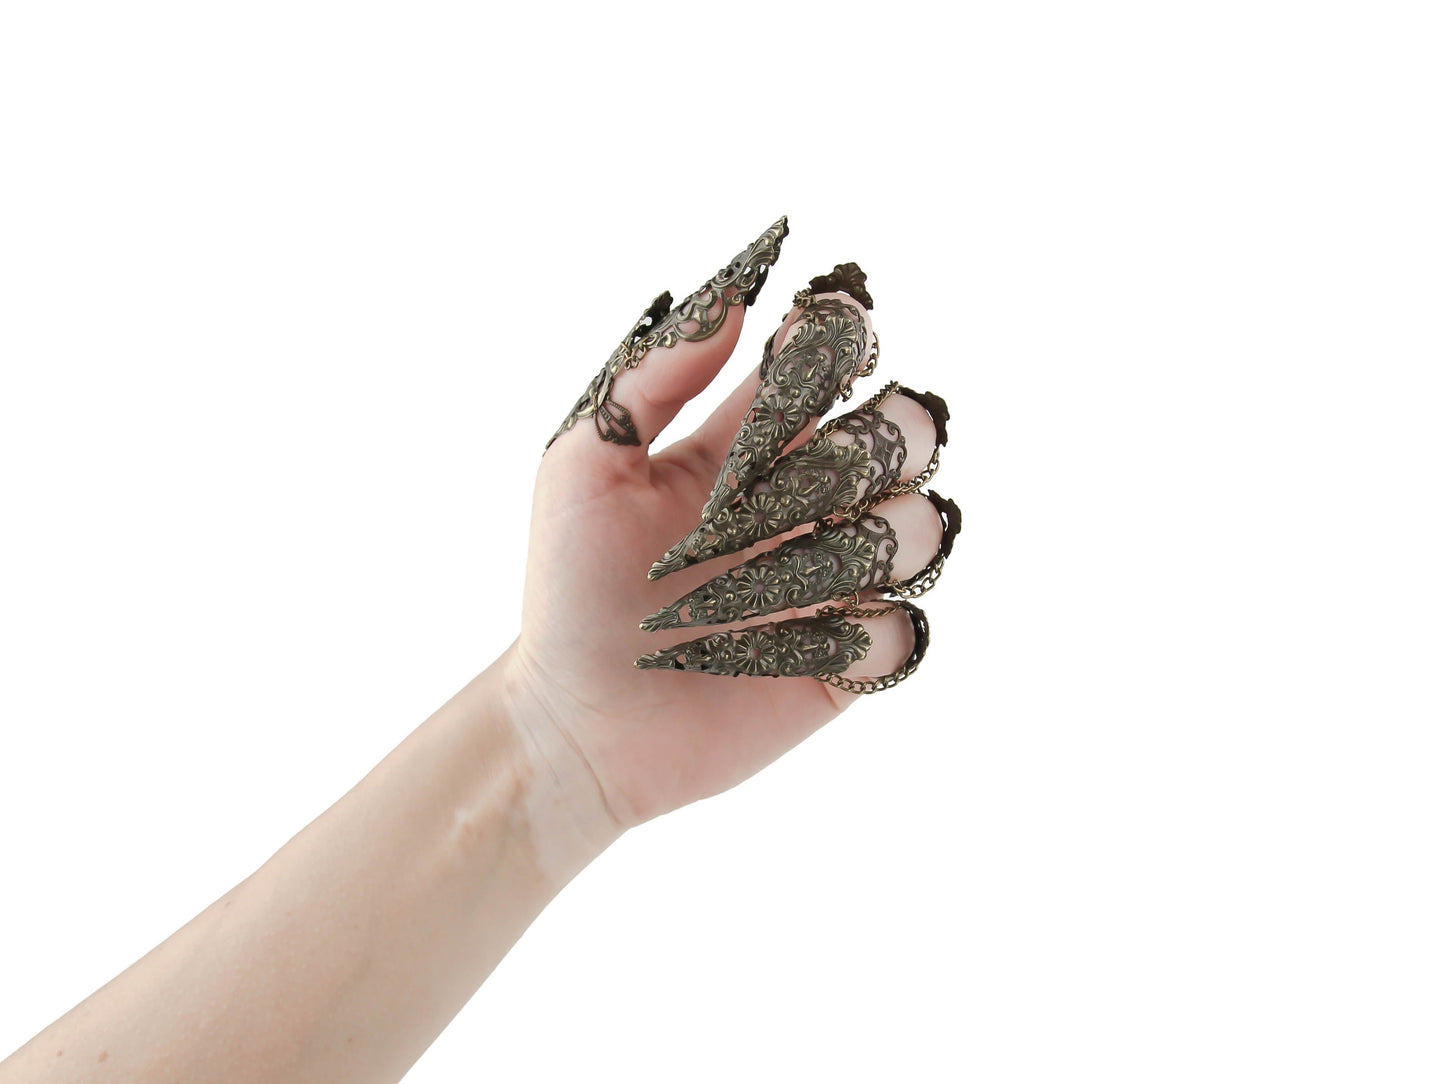 The rear of a hand strikingly showcases Myril Jewels' bronze metal lace finger armor rings, a bold statement accessory aligning with the Neo Gothic and Witchcore aesthetics. Ideal for Halloween, Gothic-chic events, or everyday wear for Punk and Gothic Lolita enthusiasts, these handcrafted rings are a hallmark of whimsigoth elegance.